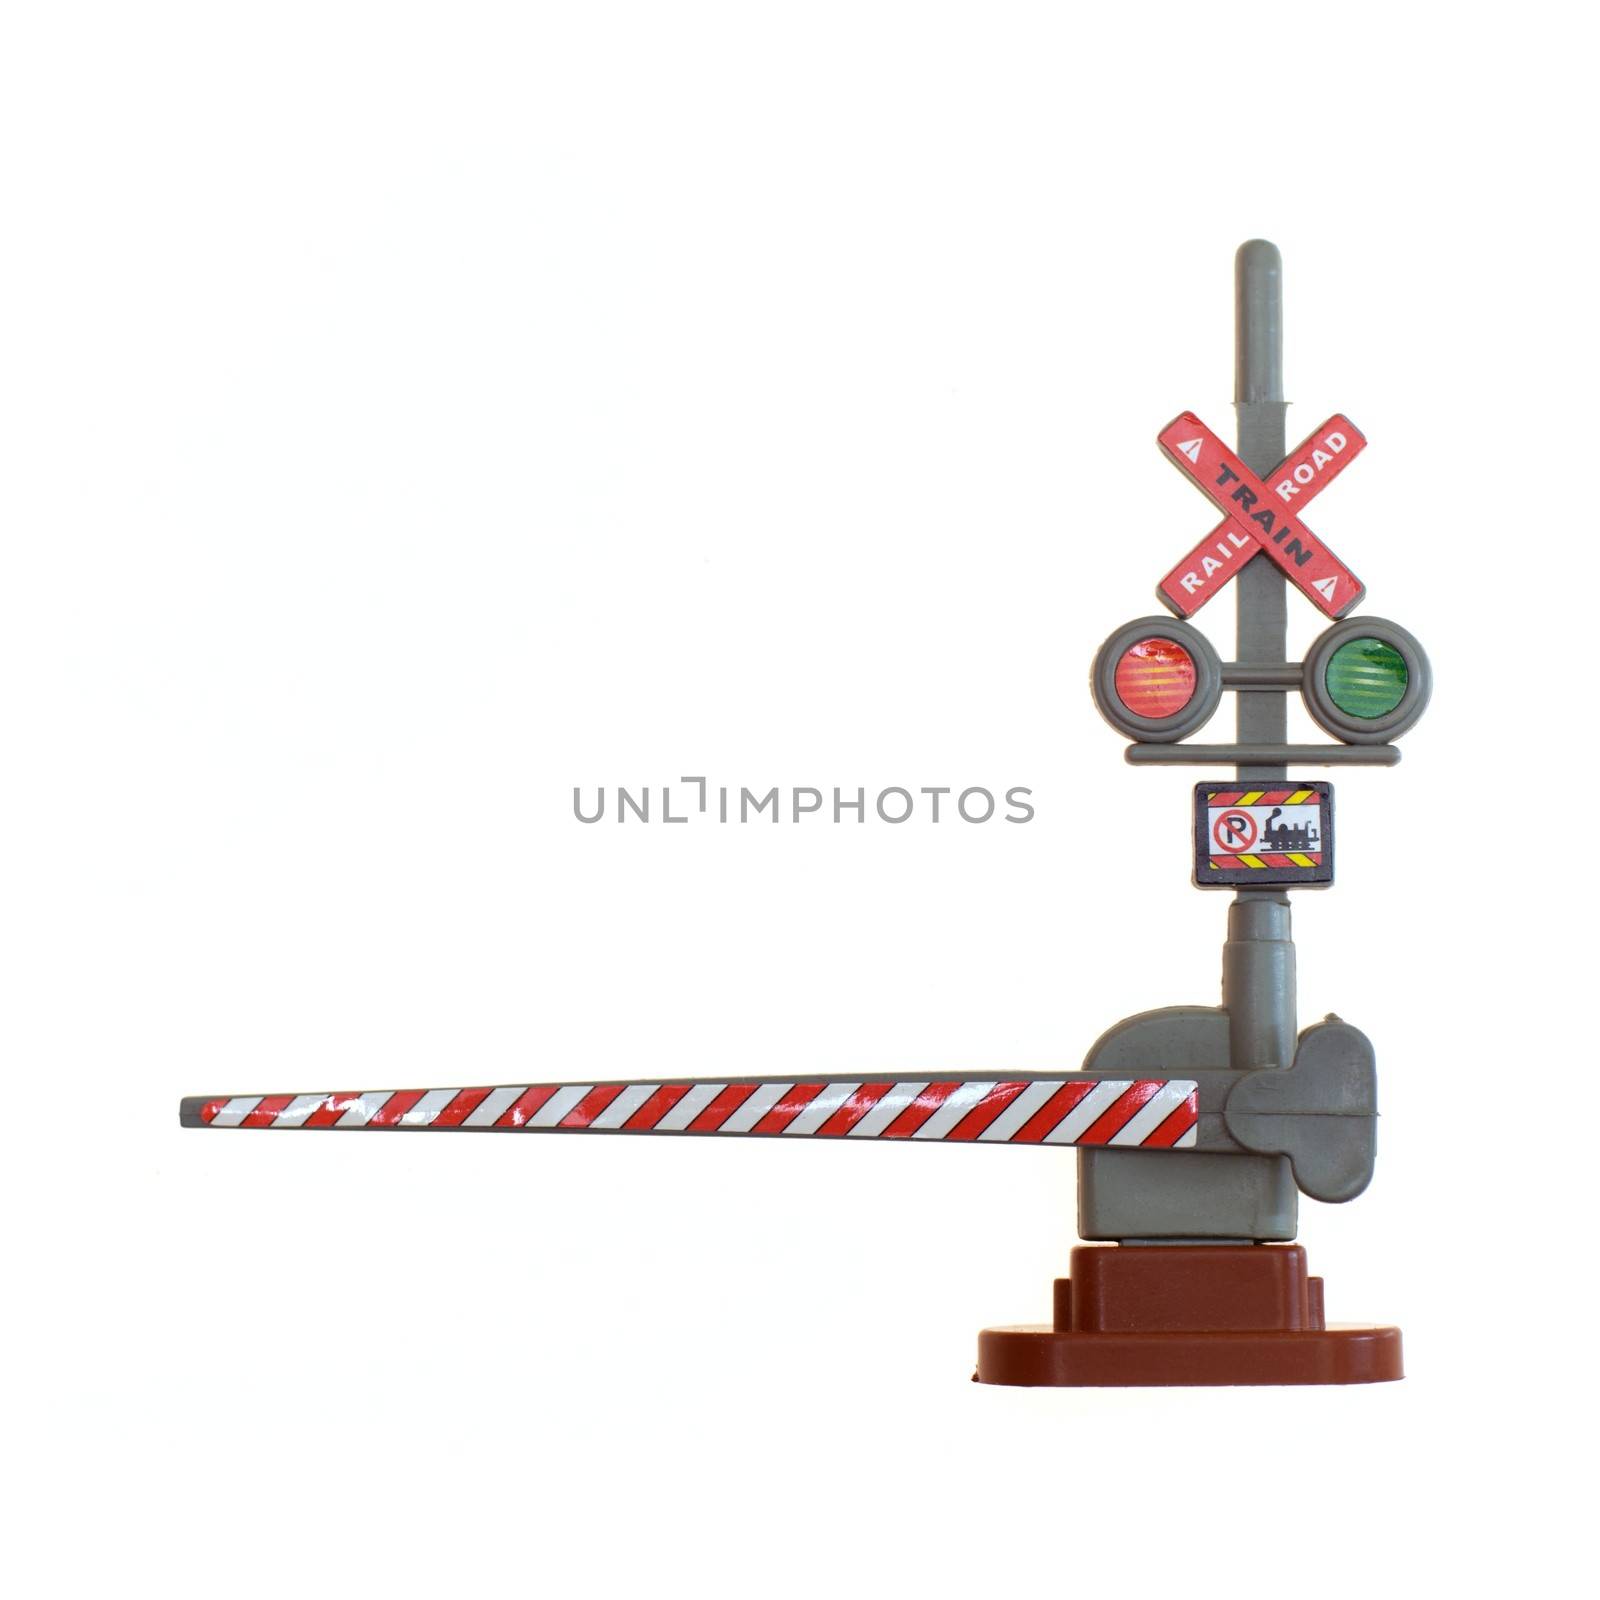 A toy train guard isolated against a white background